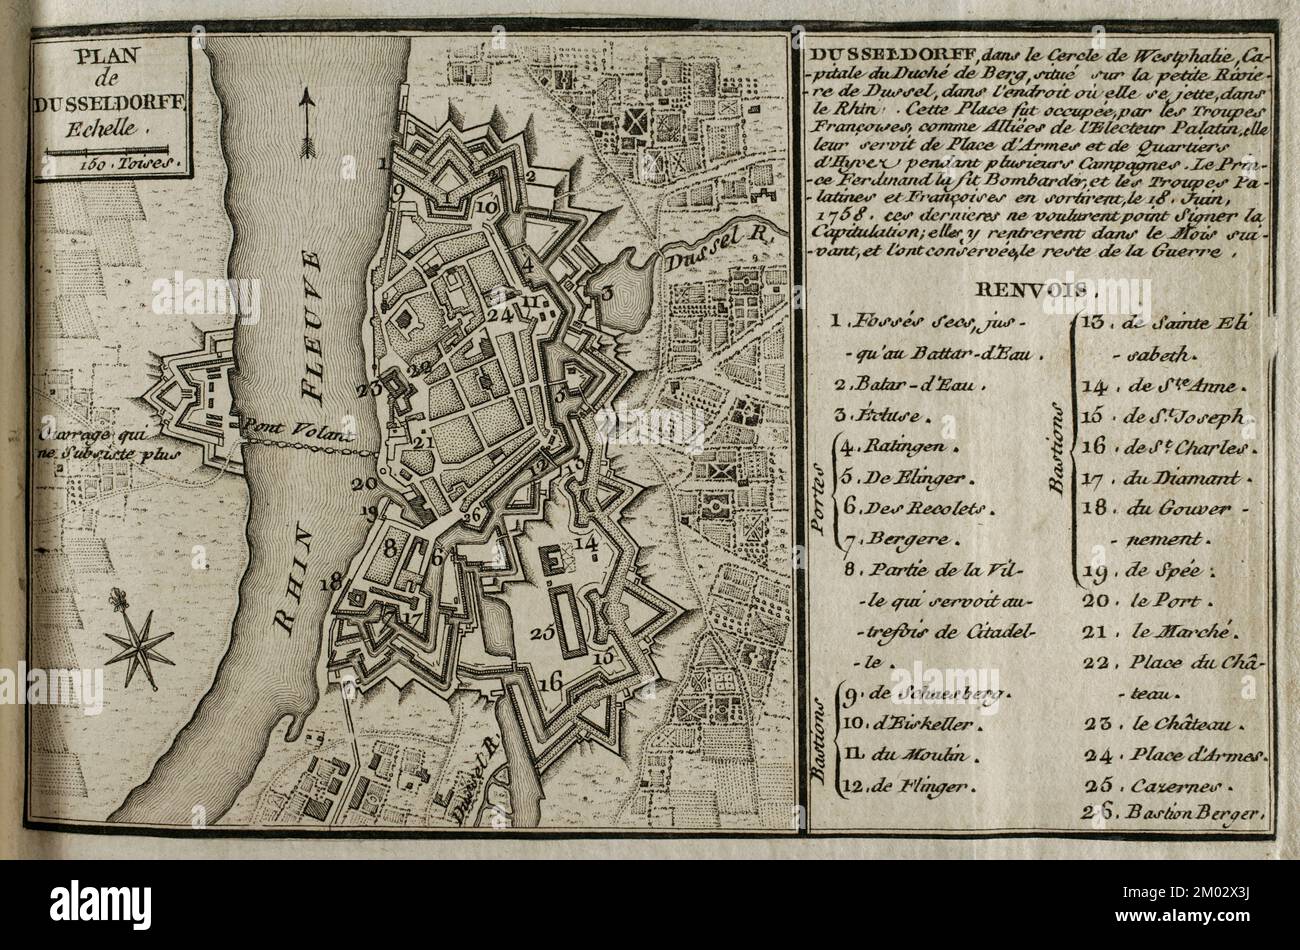 Map of Dusseldorf, 1758. Published in 1765 by the cartographer Jean de Beaurain (1696-1771) as an illustration of his Great Map of Germany, with the events that took place during the War of the Seven Years. French edition, 1765. Military Historical Library of Barcelona (Biblioteca Histórico Militar de Barcelona). Catalonia. Spain. Stock Photo